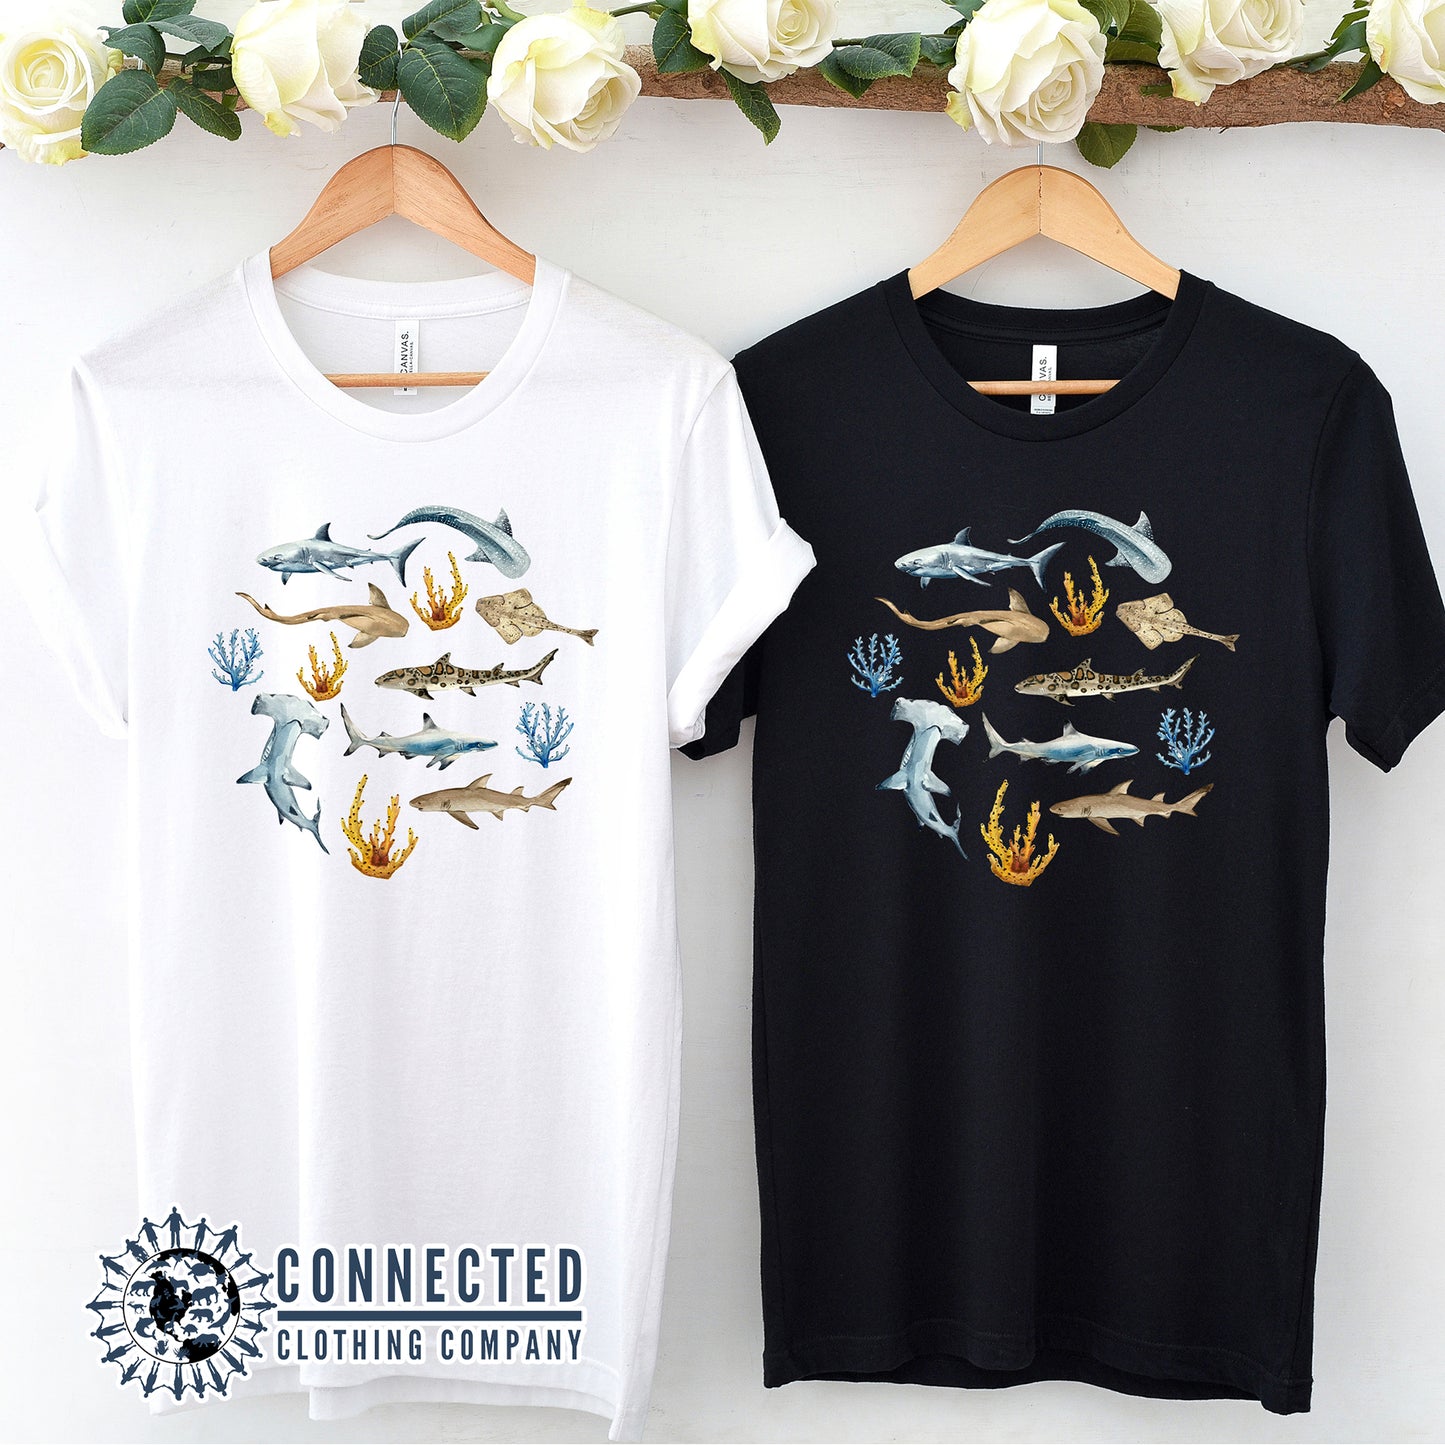 Hanging White and Black Shark Ocean Watercolor Unisex Short-Sleeve Tshirt - Connected Clothing Company - Ethically and Sustainably Made - 10% of profits donated to shark conservation and ocean conservation